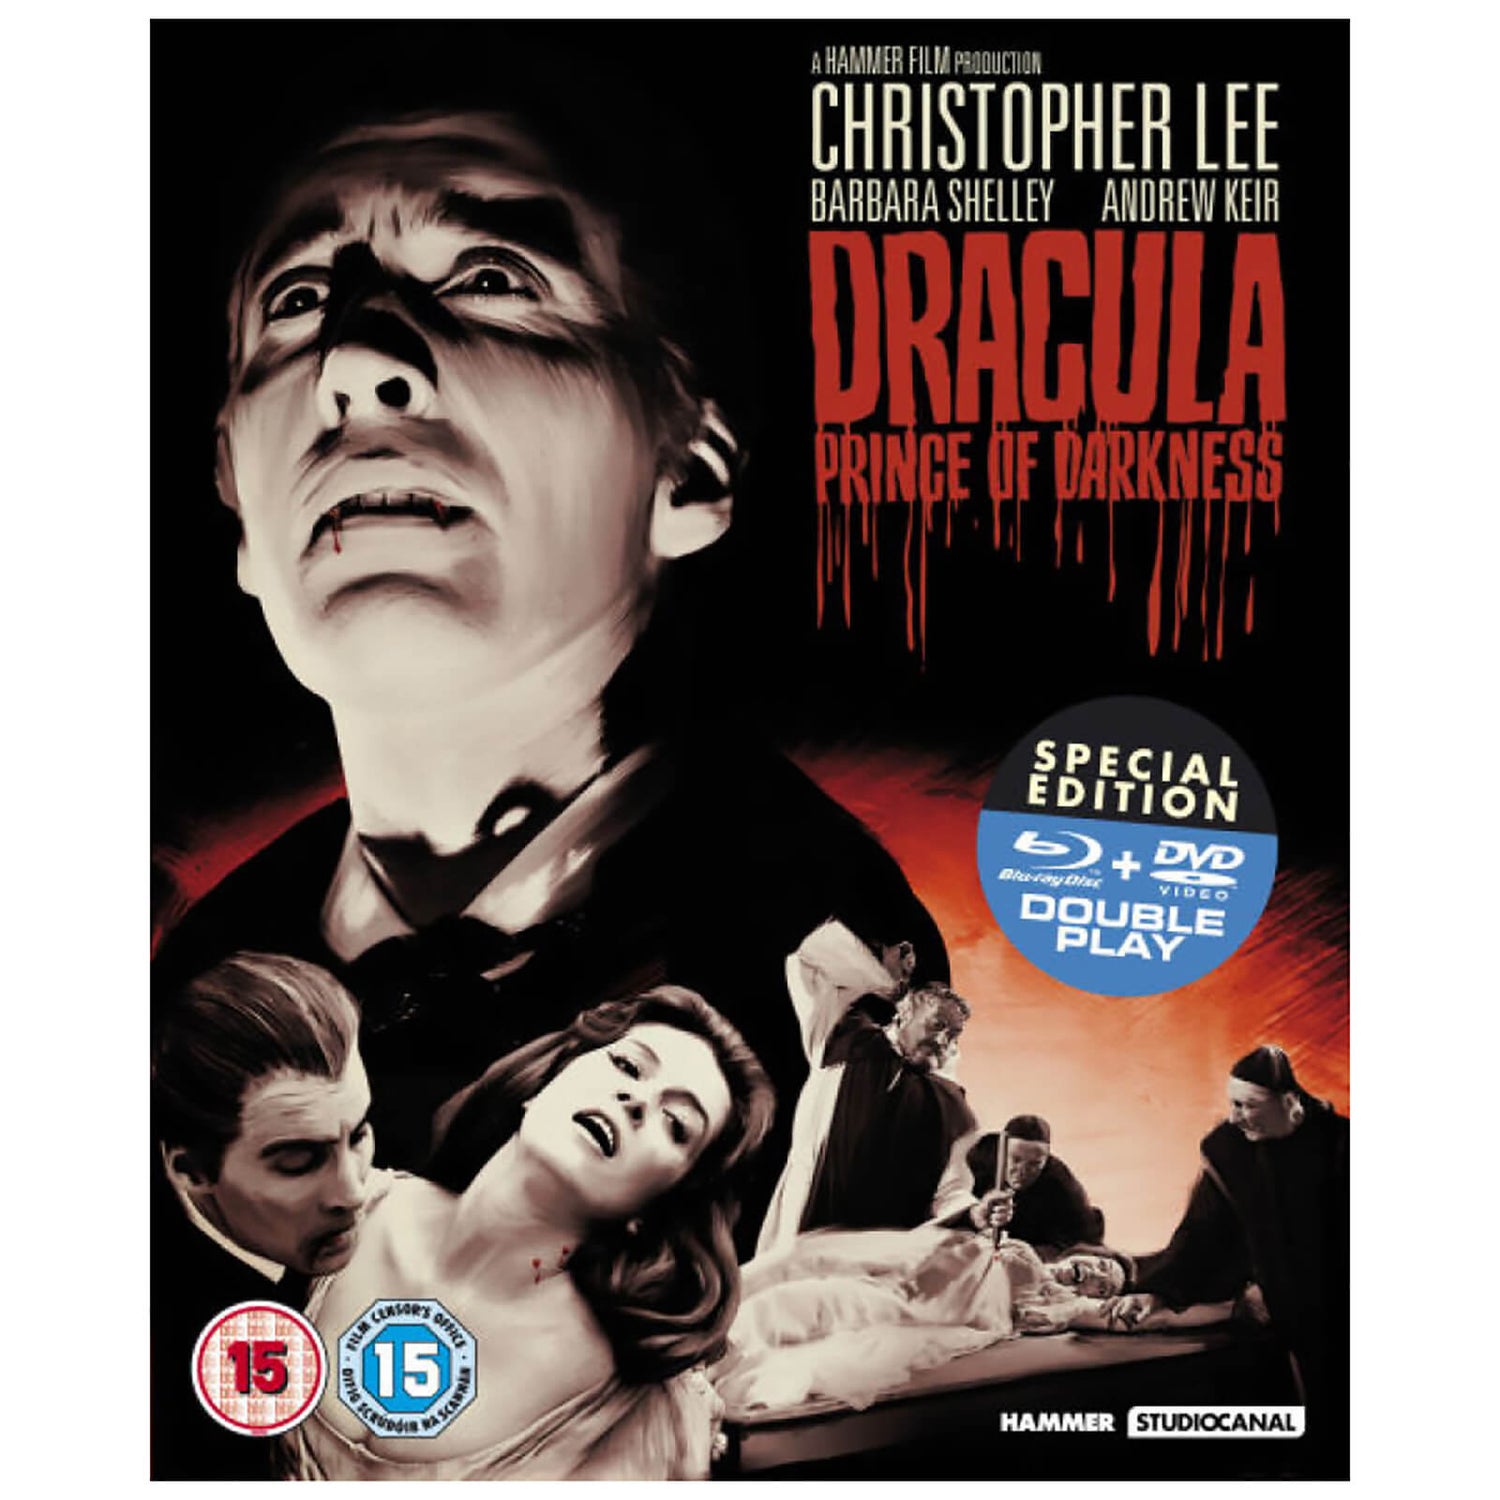 Dracula Prince of Darkness - Double Play (Blu-Ray and DVD)